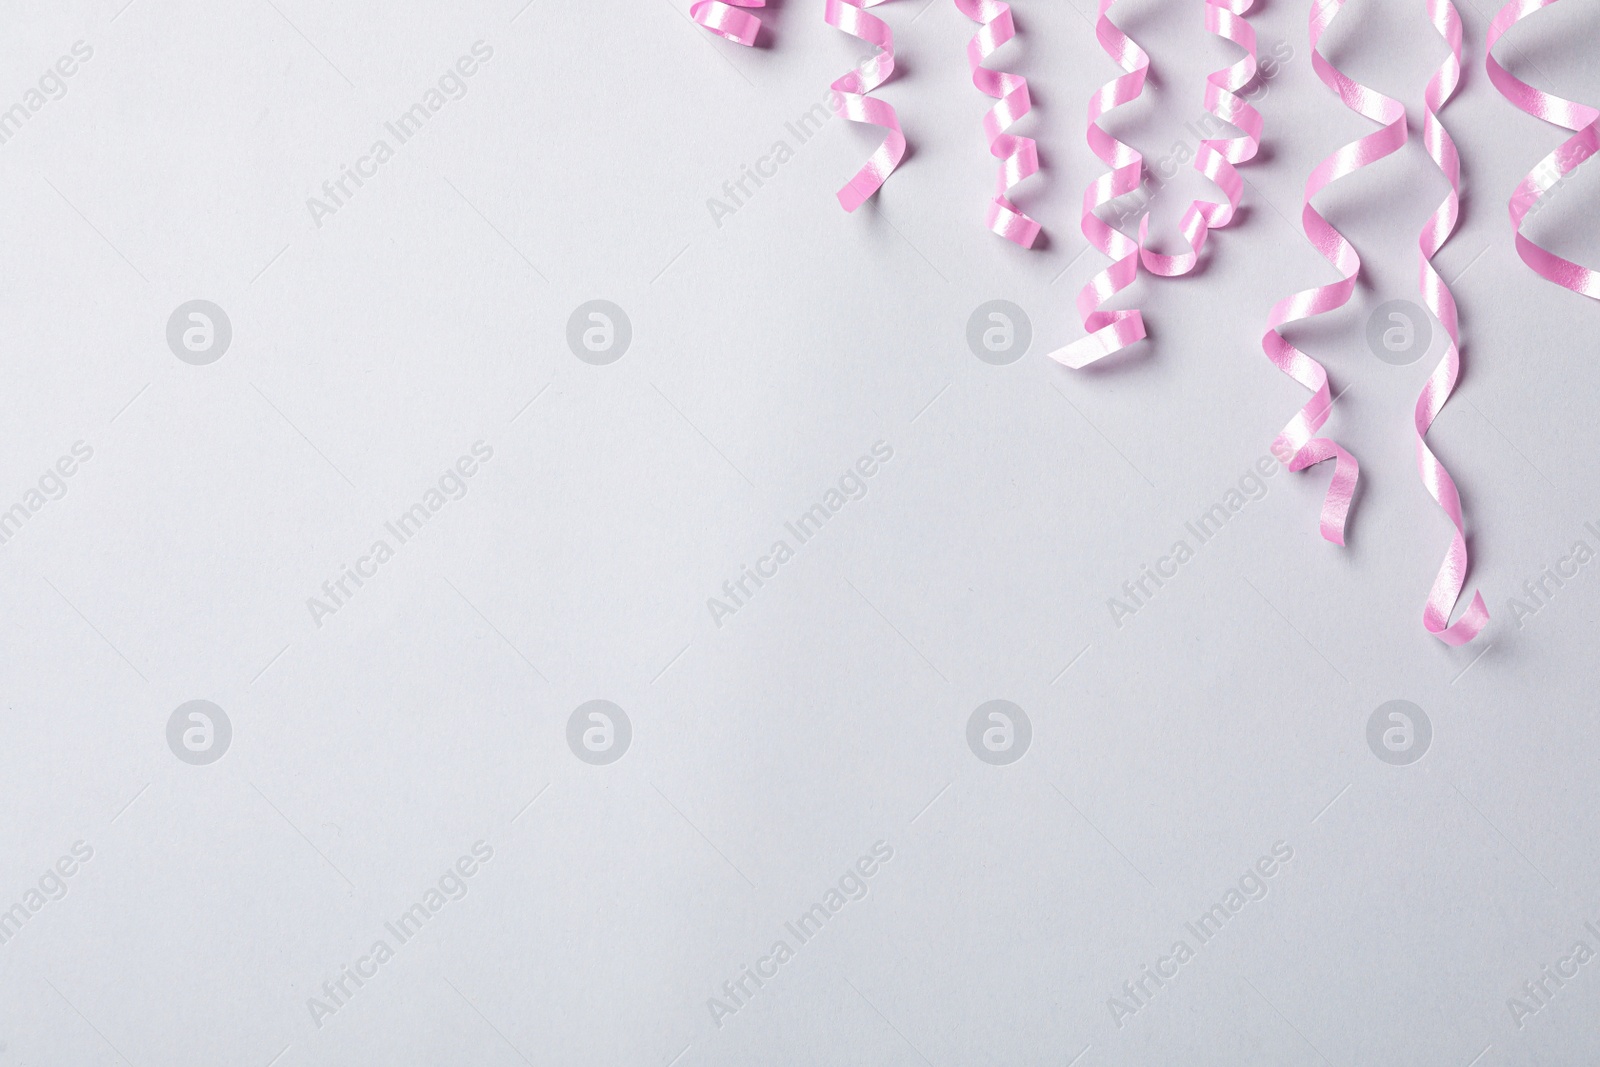 Photo of Pink serpentine streamers on light background, flat lay. Space for text